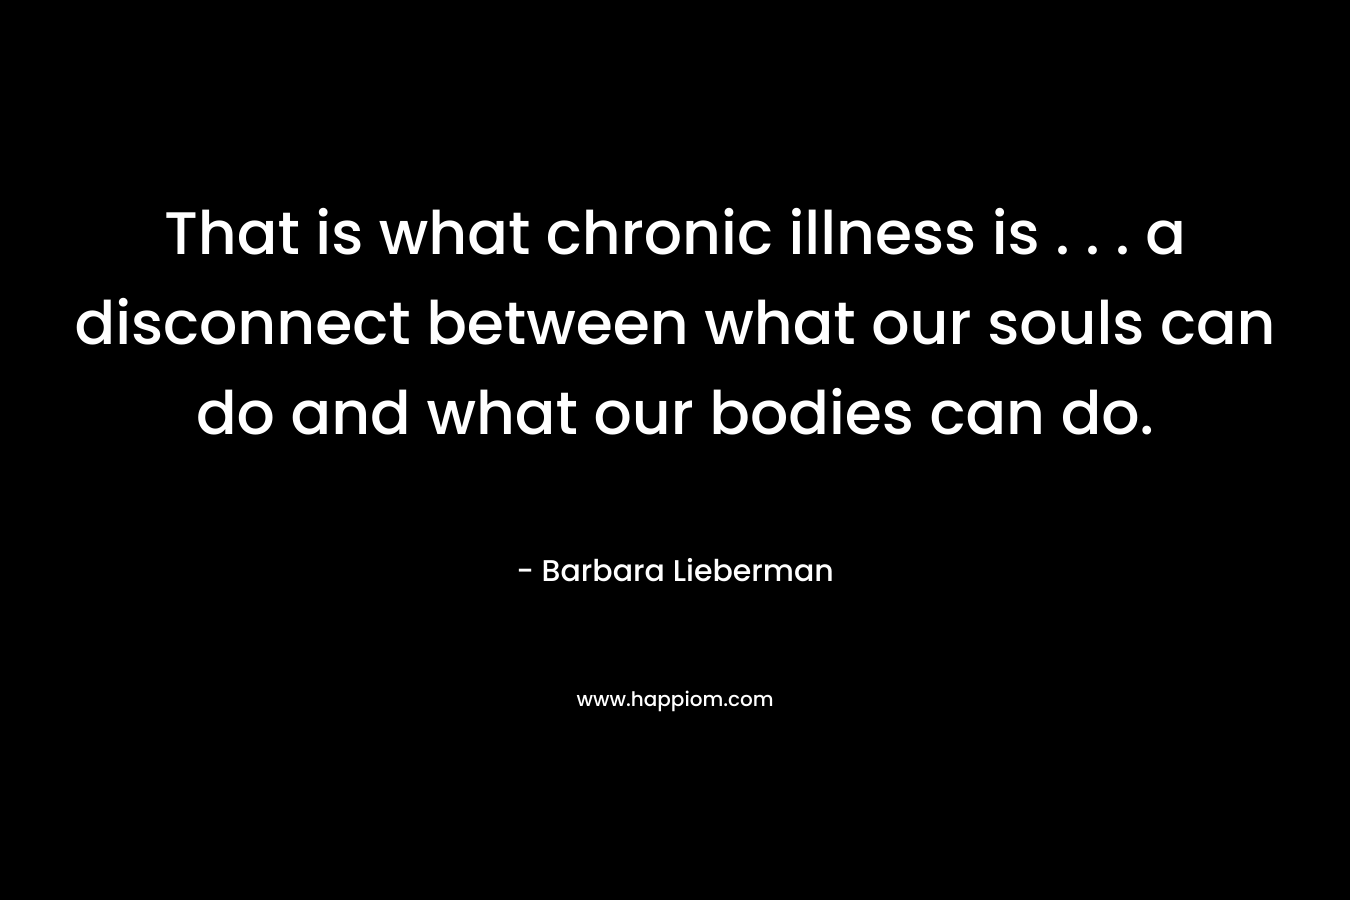 That is what chronic illness is . . . a disconnect between what our souls can do and what our bodies can do. – Barbara Lieberman